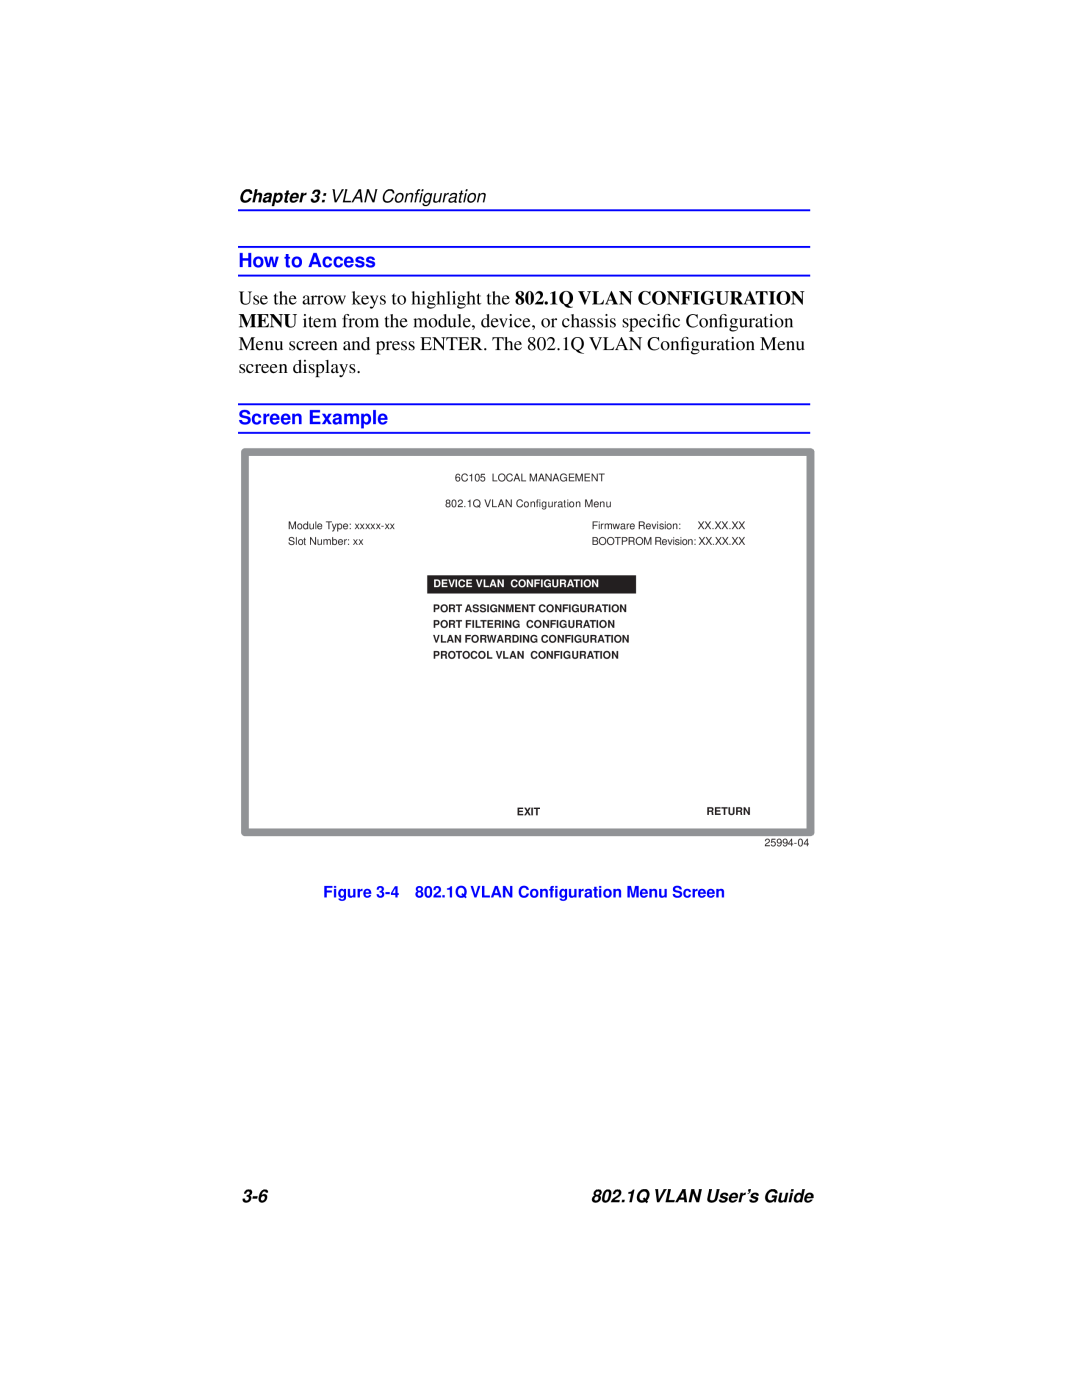 Cabletron Systems manual How to Access, Screen Example, 4 802.1Q VLAN Conﬁguration Menu Screen 